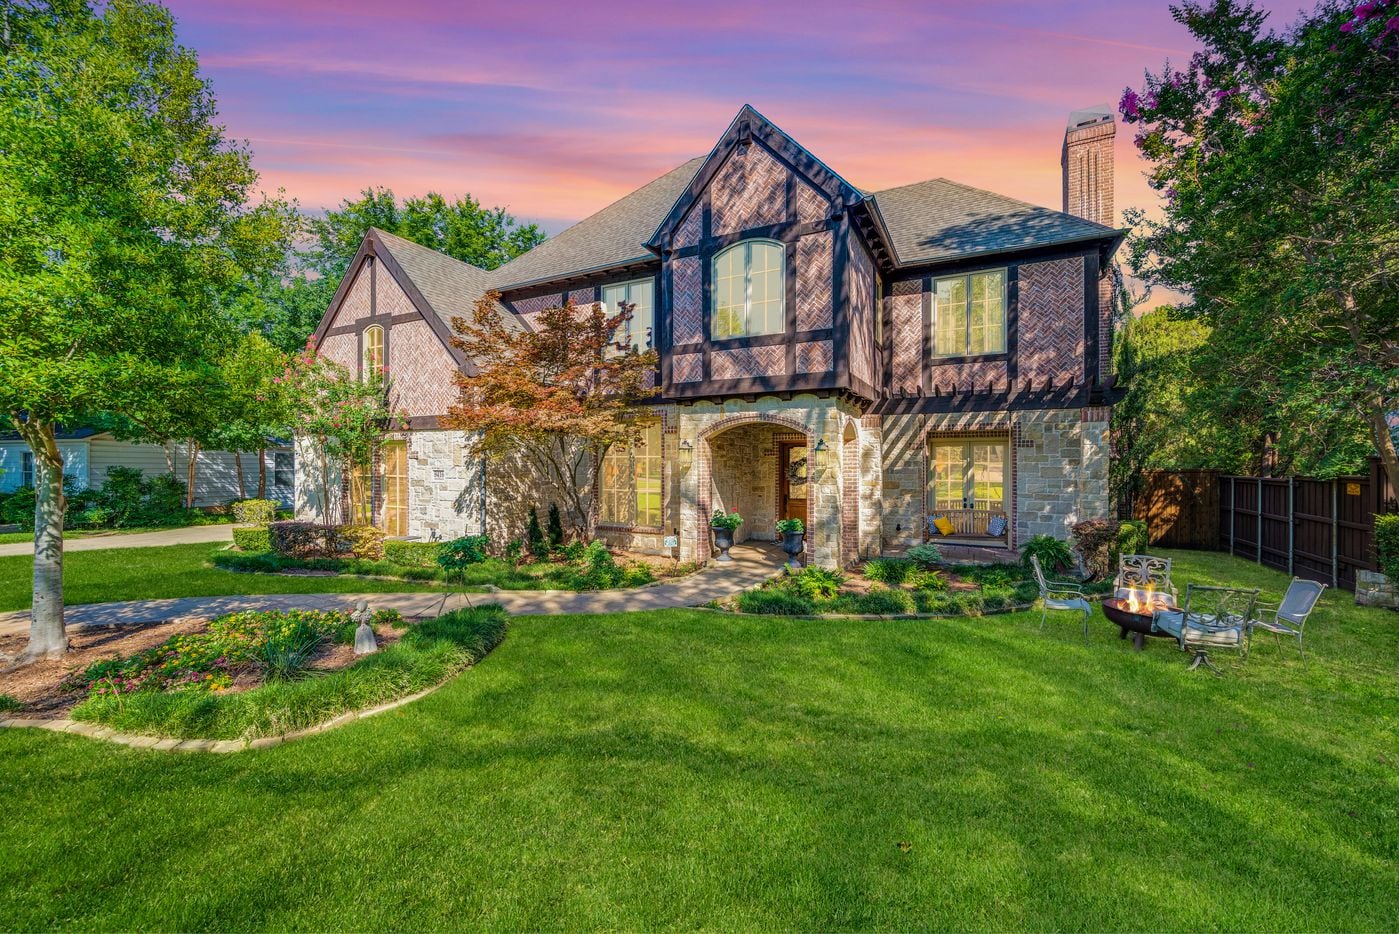 The traditional-style home is set on an oversized lot in the heart of Forest Hills.